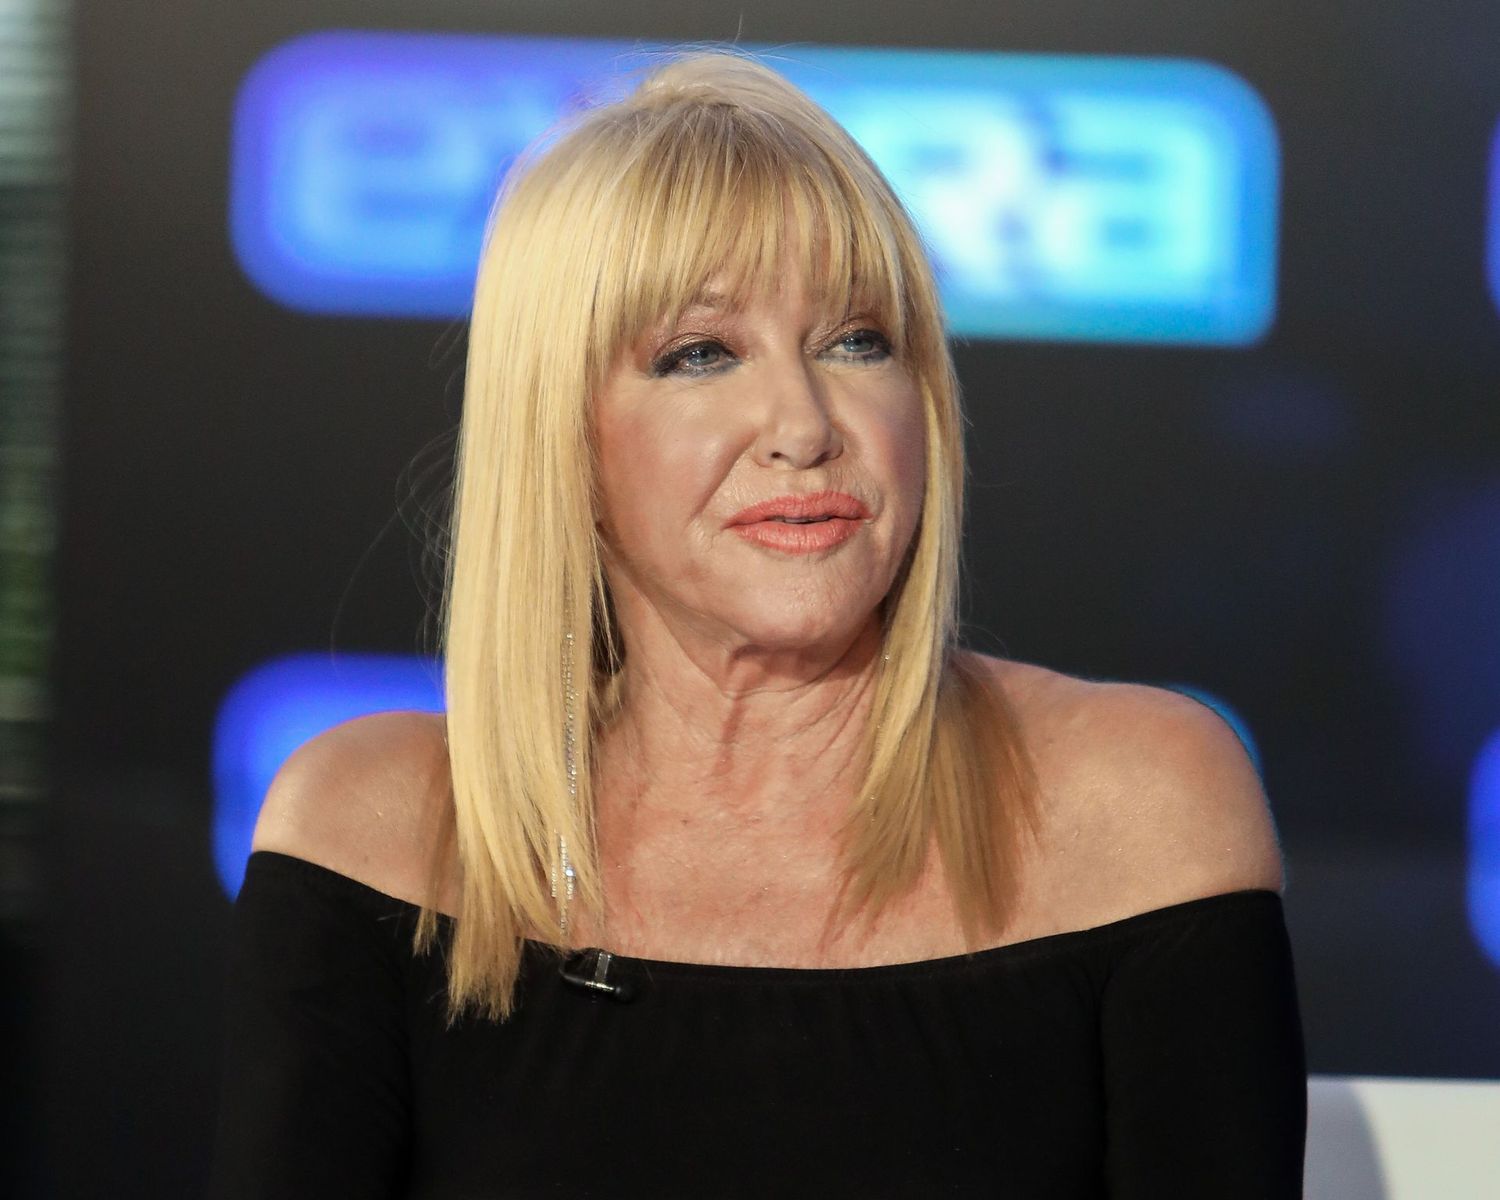 Suzanne Somers visits “Extra” at Burbank Studios on February 19, 2020. | Photo:Getty Images